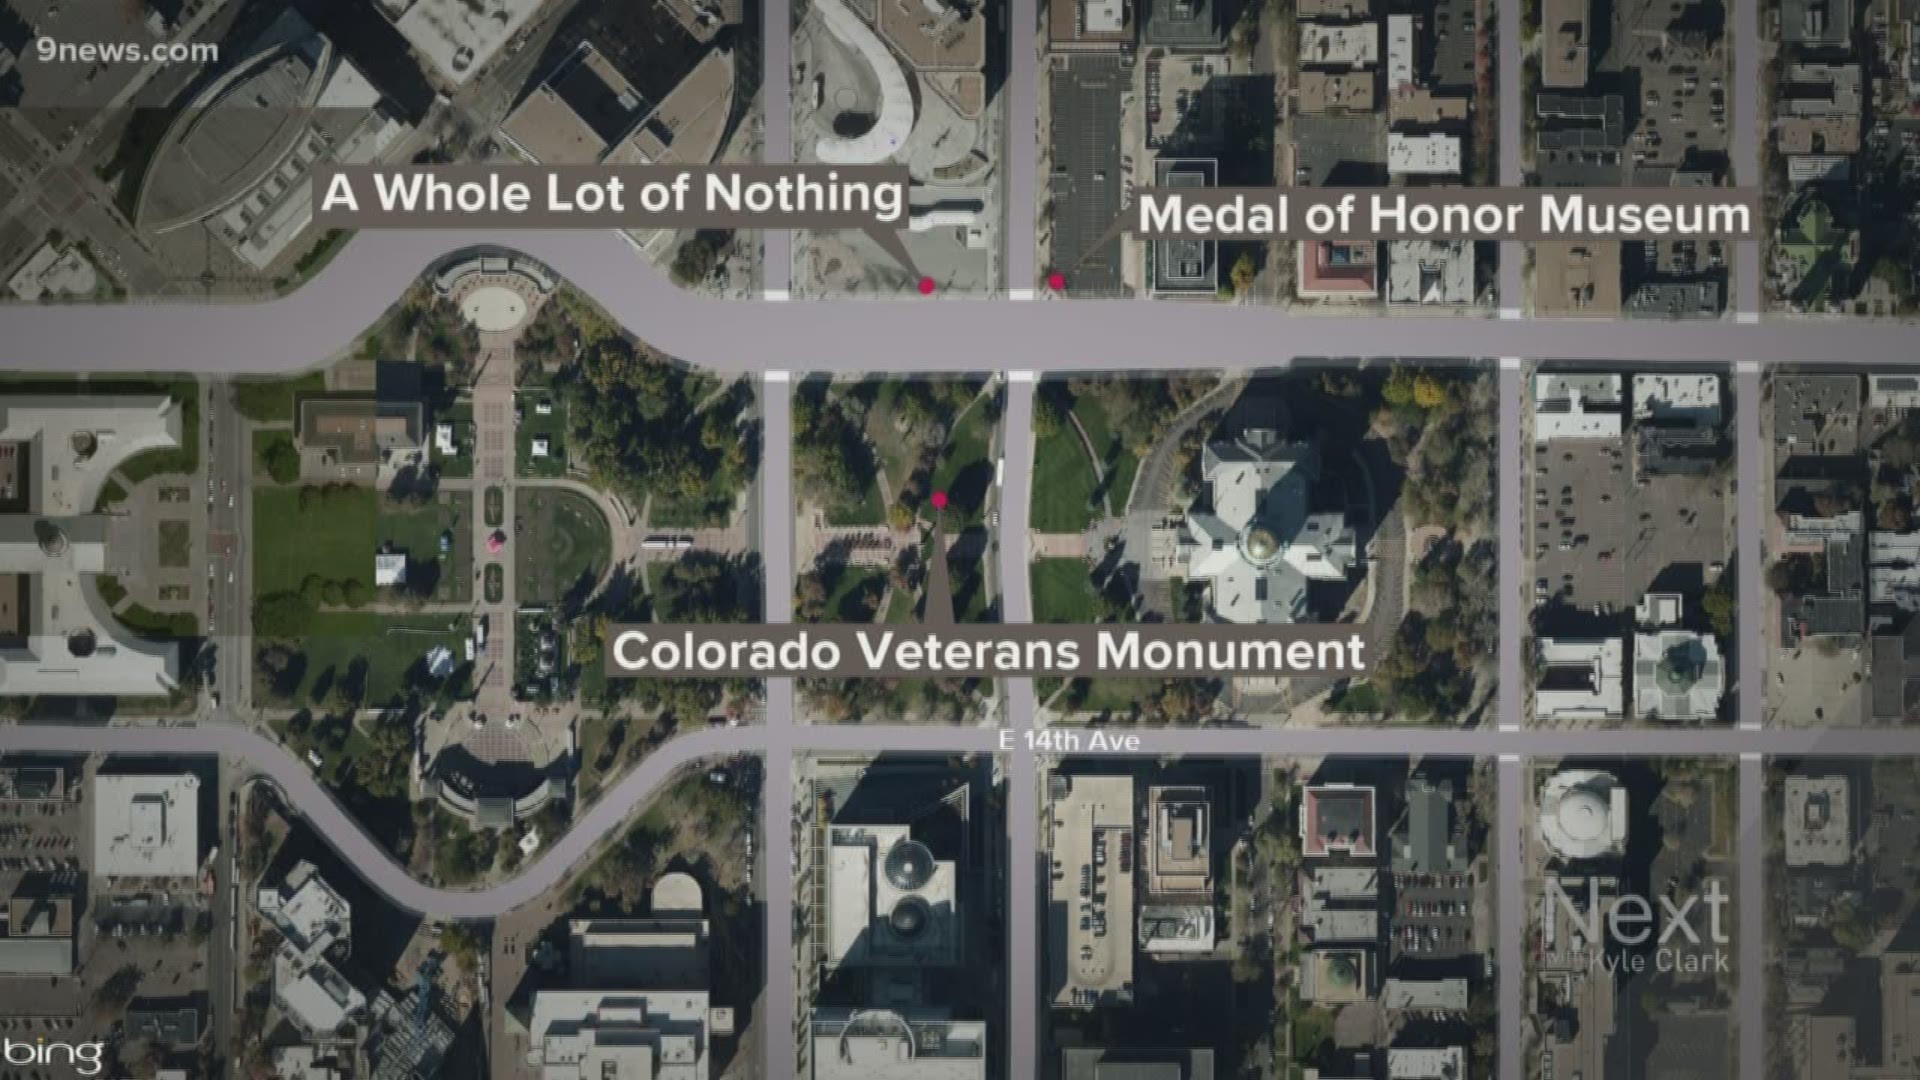 And RTD board shot down an idea to give up a vacant lot for the National Medal of Honor Museum. But one board member wonders if officials know about the park nearby.